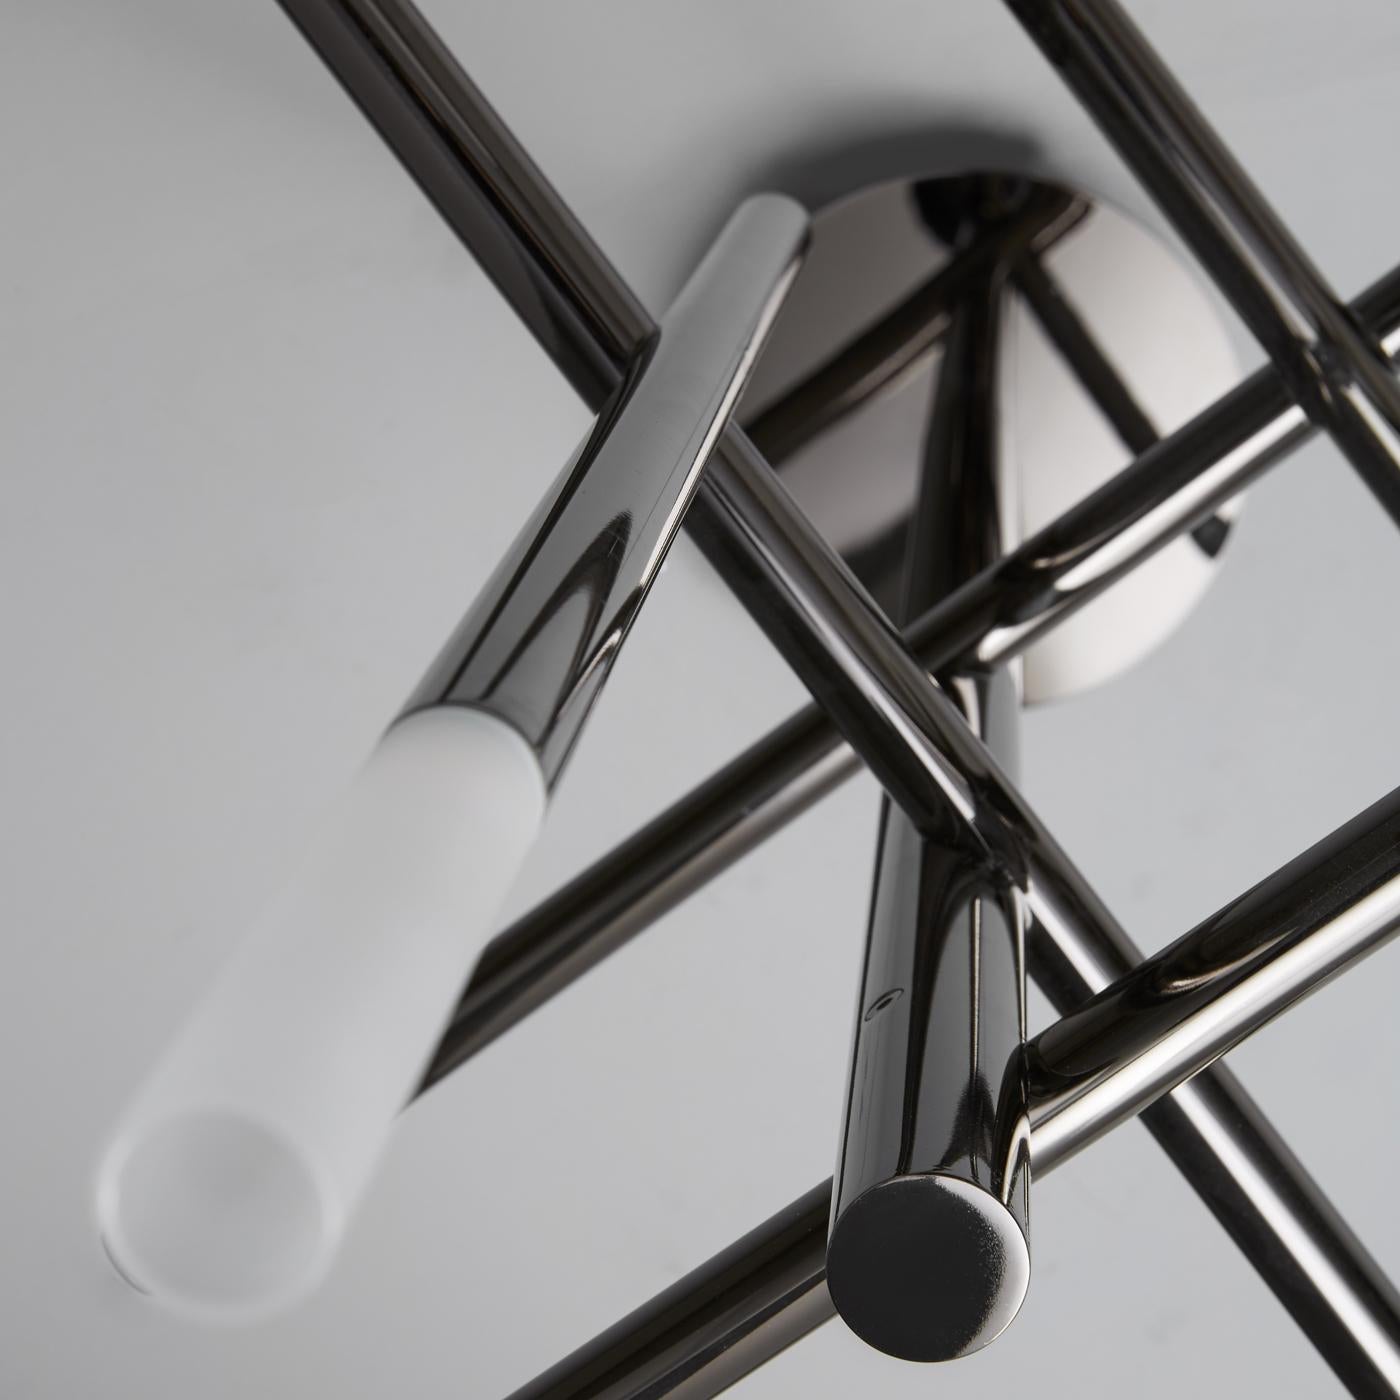 This elegant chandelier with a polished black nickel structure projects direct light from glazed glass diffusers at the top of metal rods assembled to form a system of parallel and perpendicular lines. The finish of the metal can also be in polished